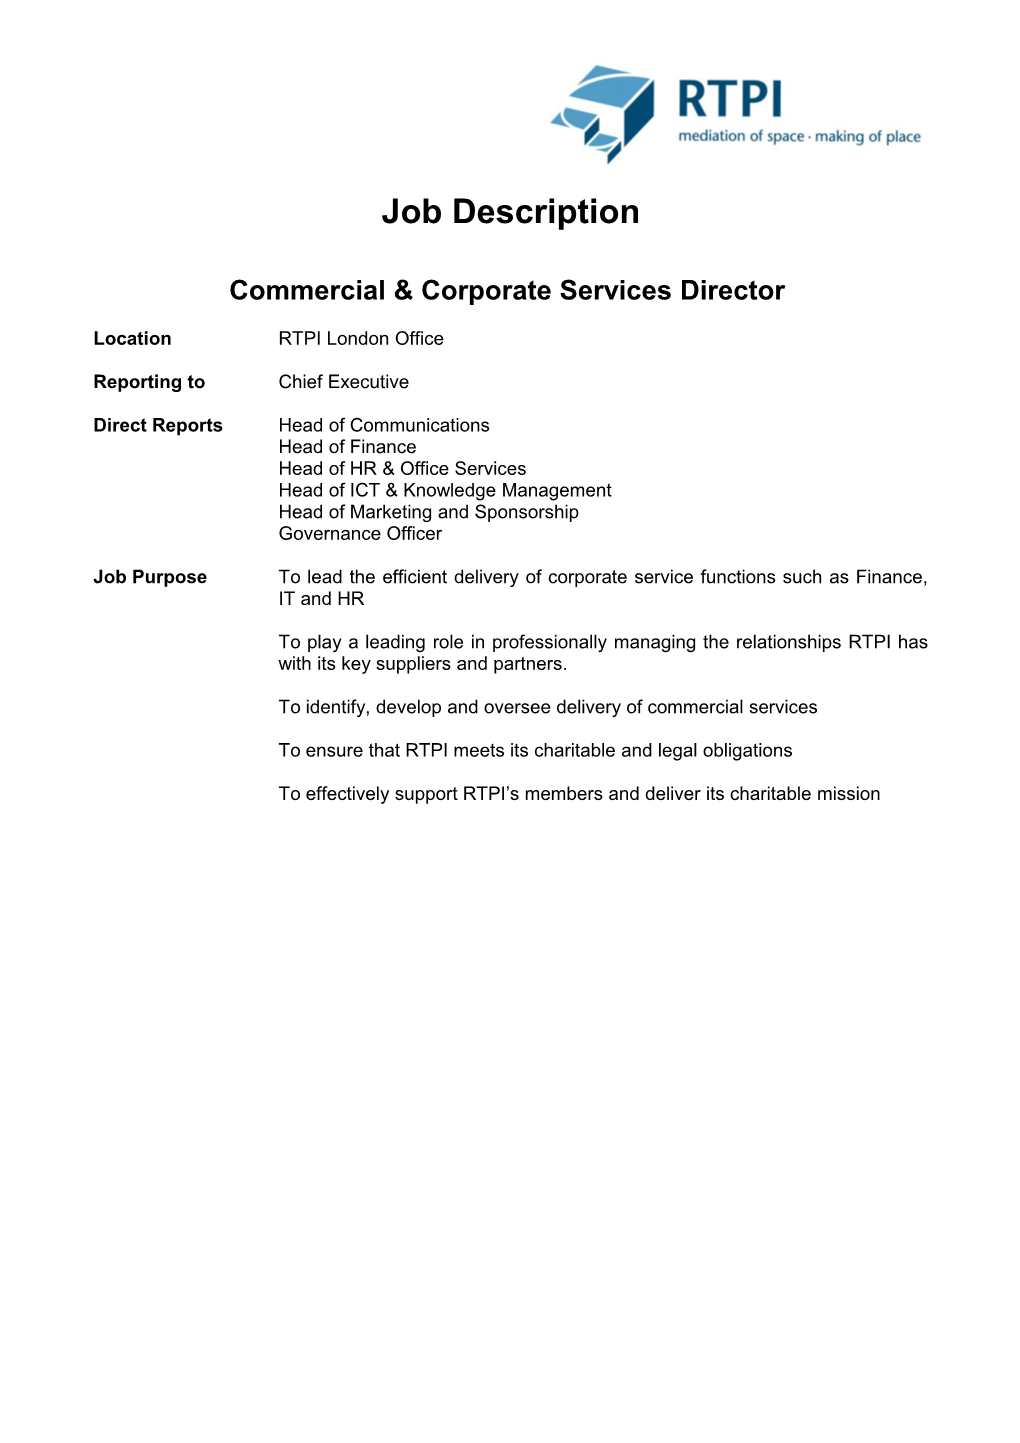 Commercial & Corporate Services Director